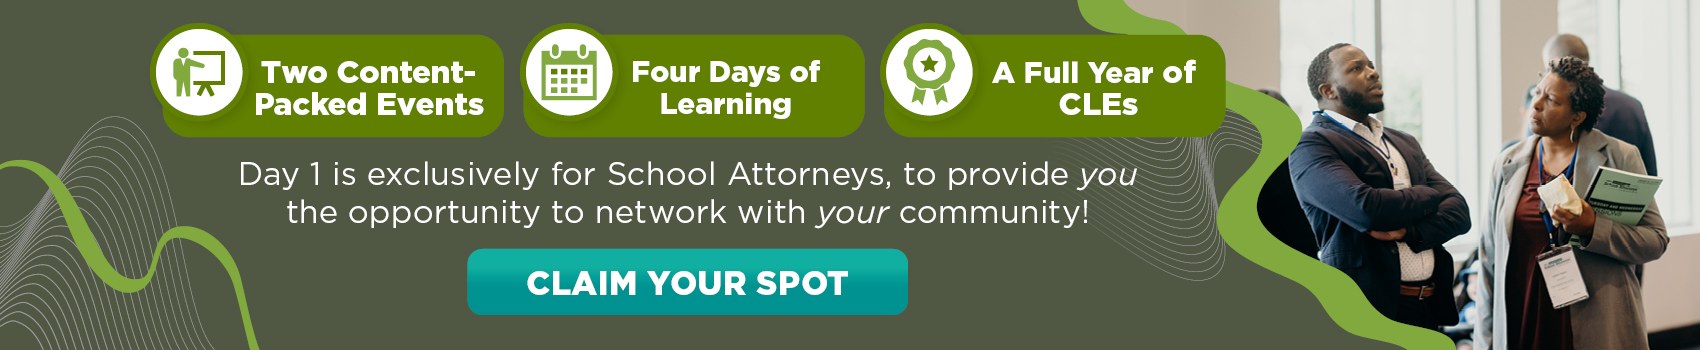 2 Content-Packed Events 
4 Days of Learning A Full Year of CLEs Day 1 is exclusively for School Attorneys, to provide you the opportunity to network with your community!
 Claim Your Spot  